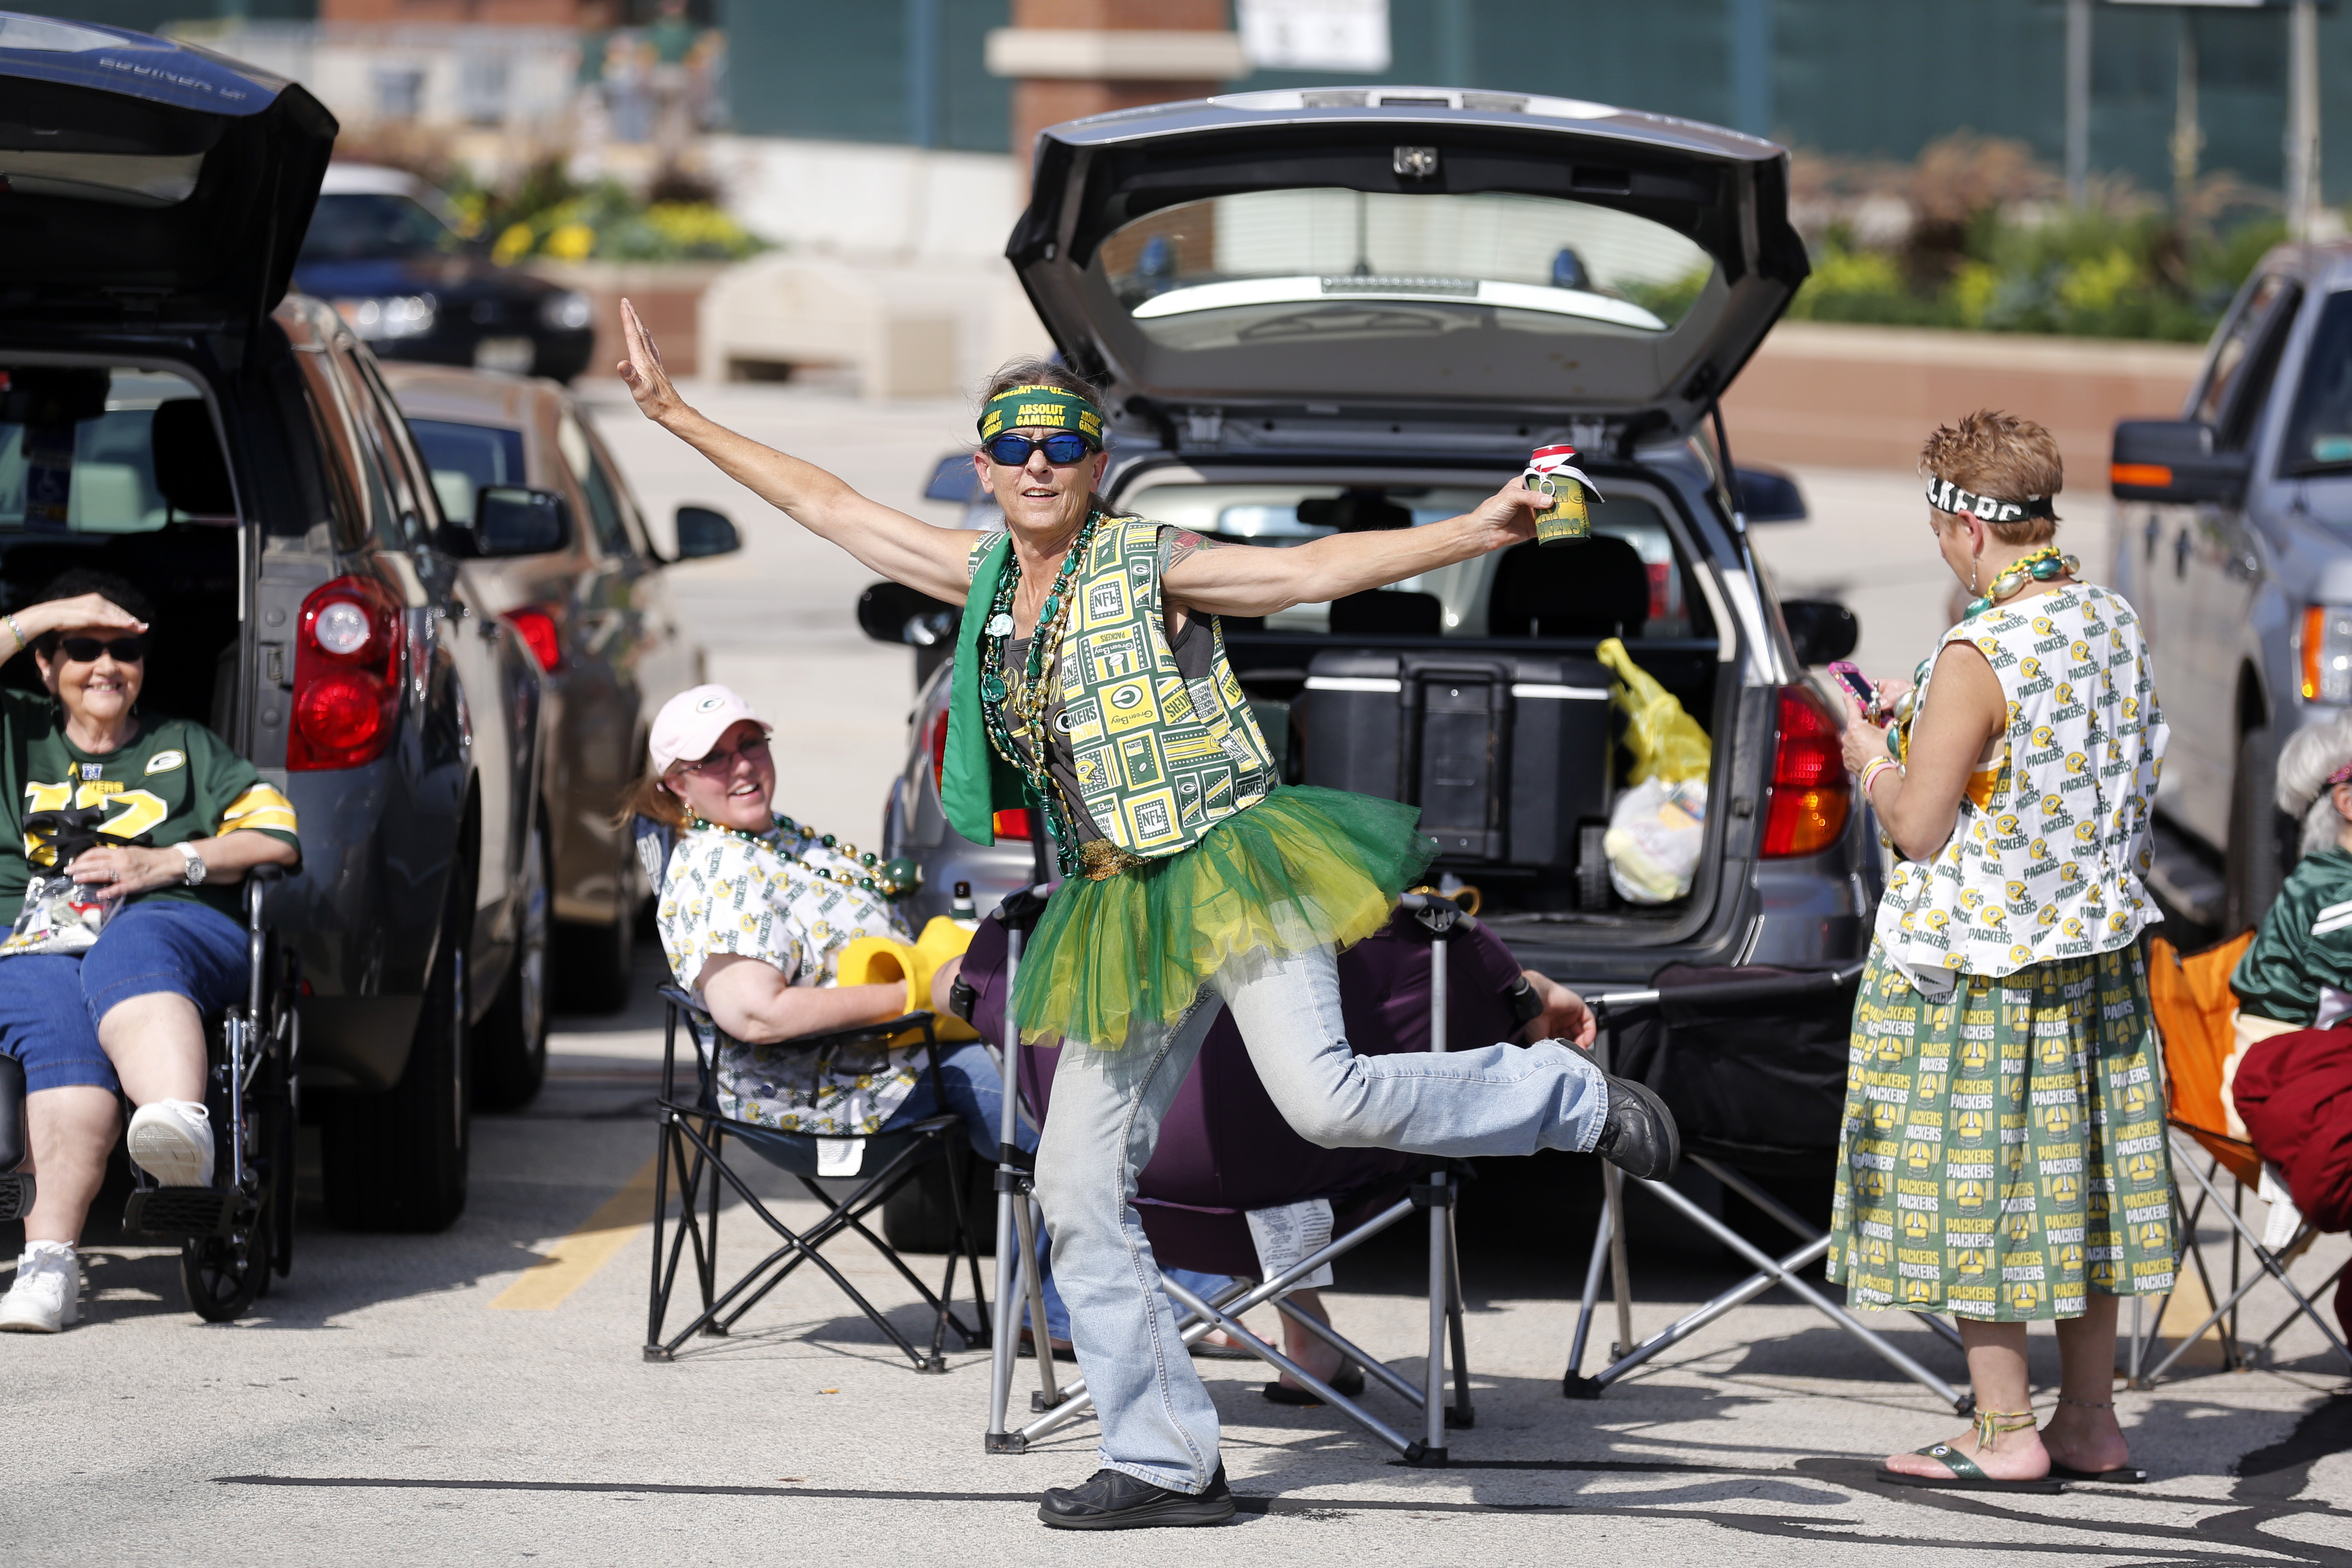 Fans tailgate before a preseason NFL football game between the Green Bay Packers and the New Orleans Saints Thursday, Sept. 3, 2015, in Green Bay, Wis. (AP Photo/Jeffrey Phelps)